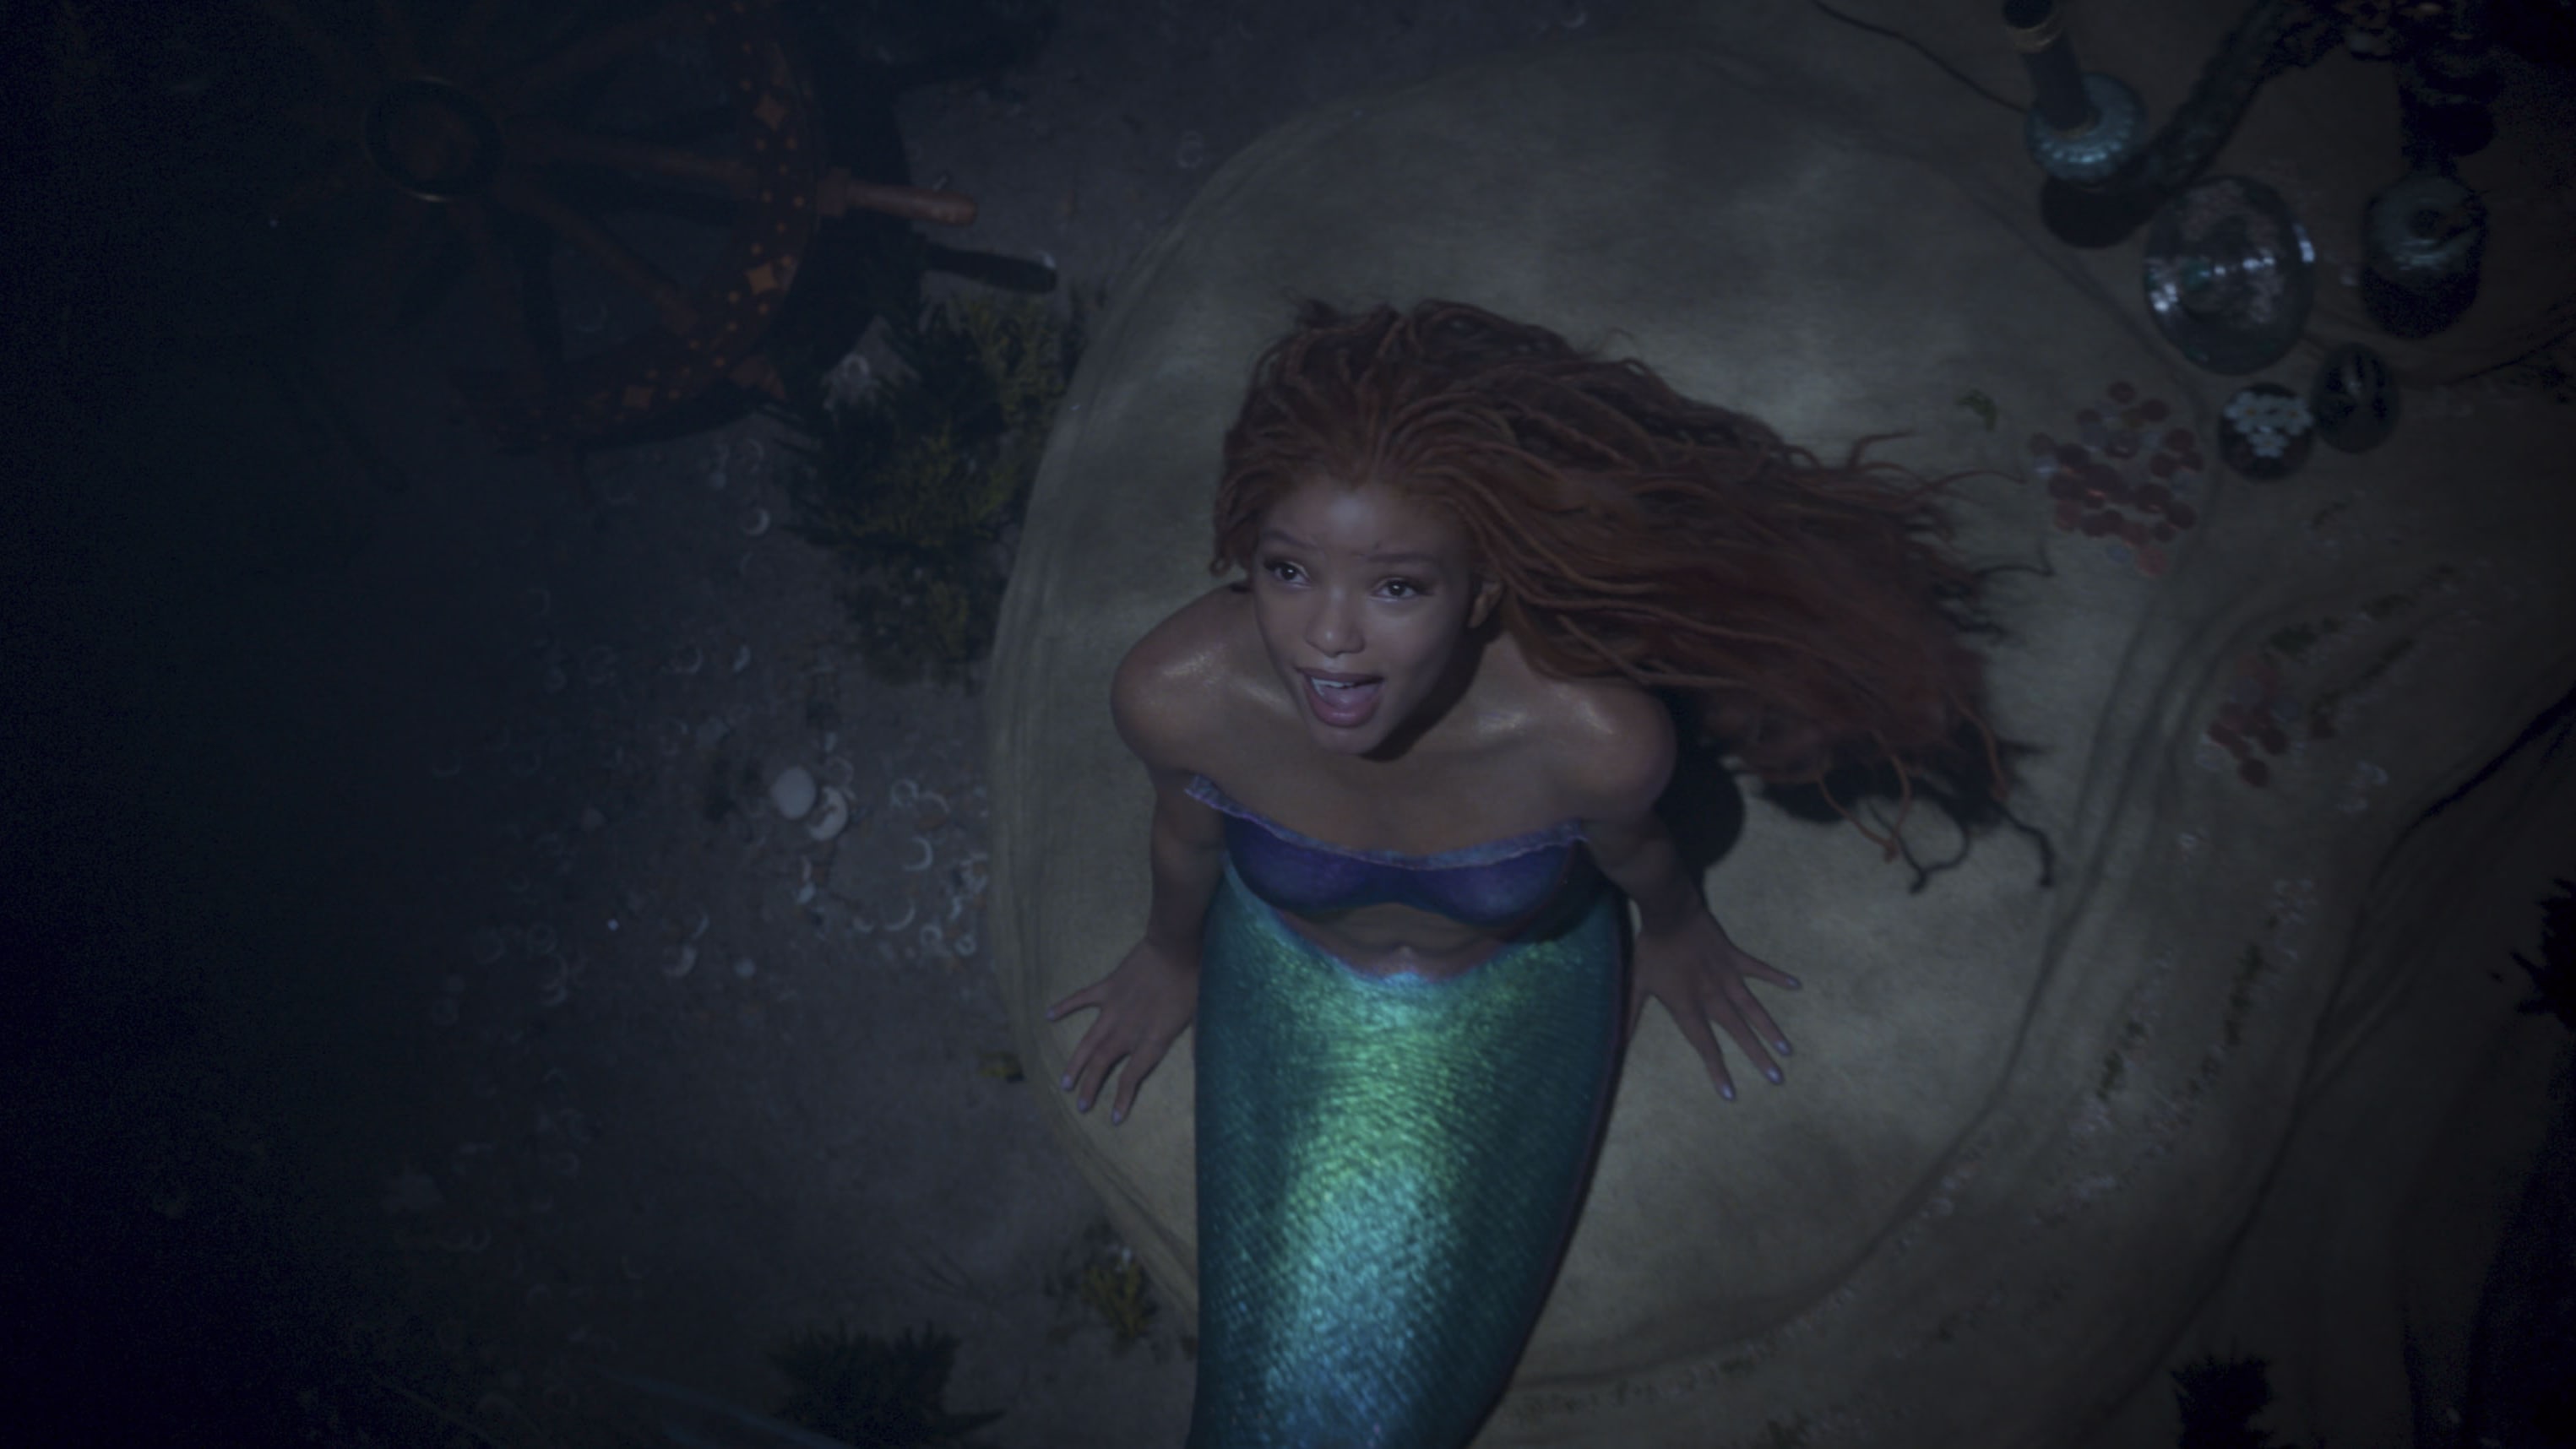 Disney have released the latest teaser trailer for the upcoming live-action adaptation of the animated classic The Little Mermaid.